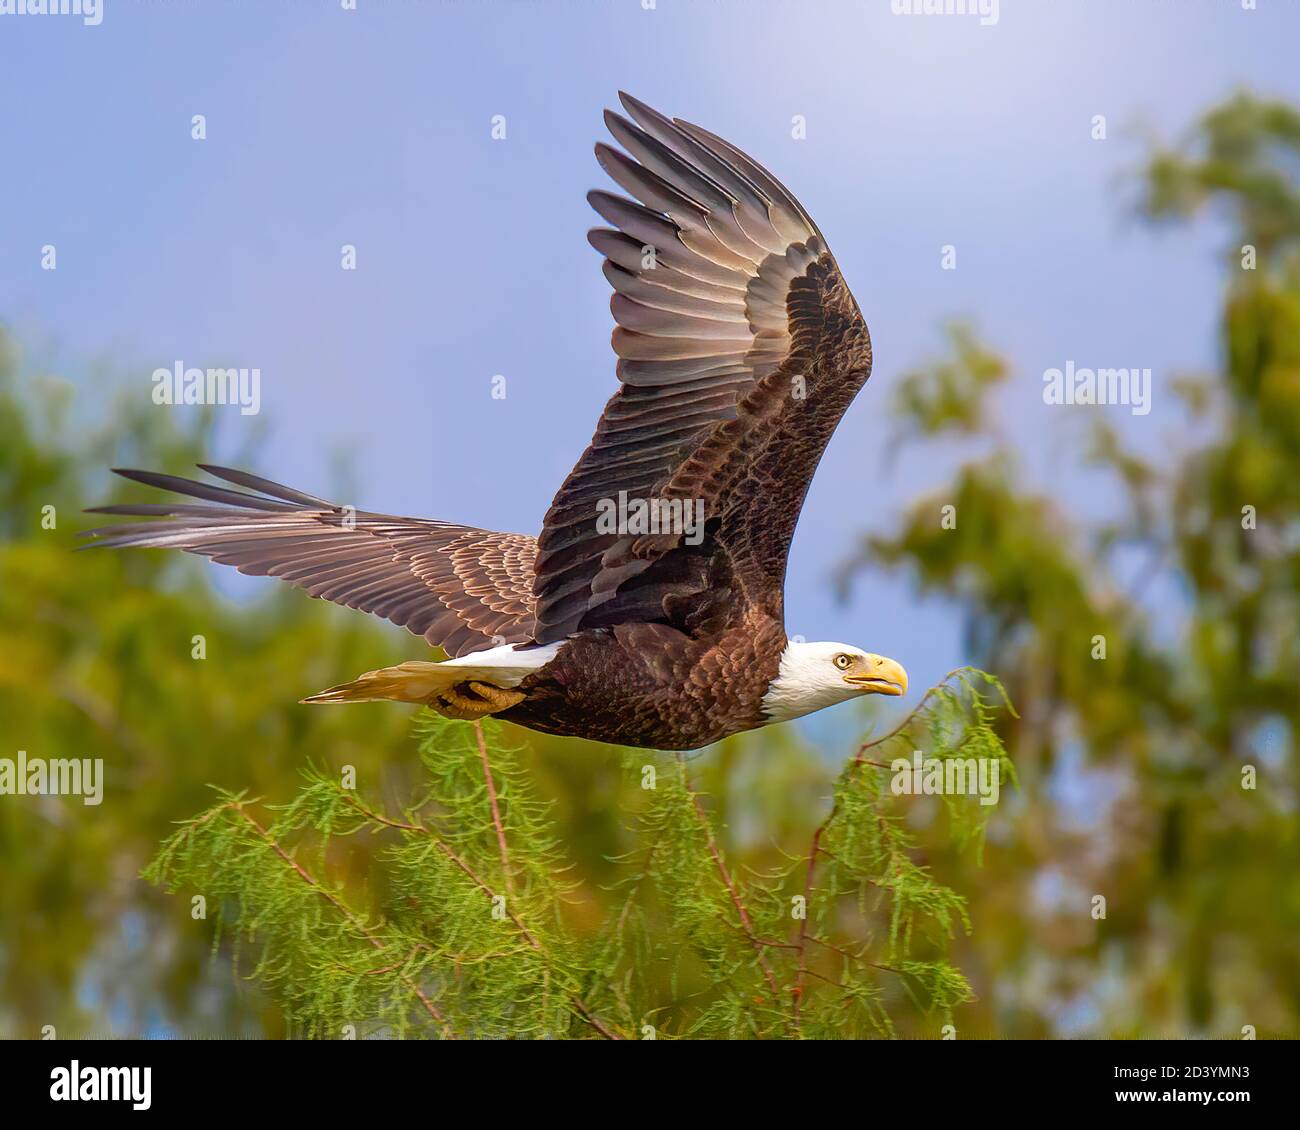 A Bald Eagle takes flight in the Florida Everglades. Bald Eagles are found throughout North America, Alaska, and northern Mexico. Stock Photo